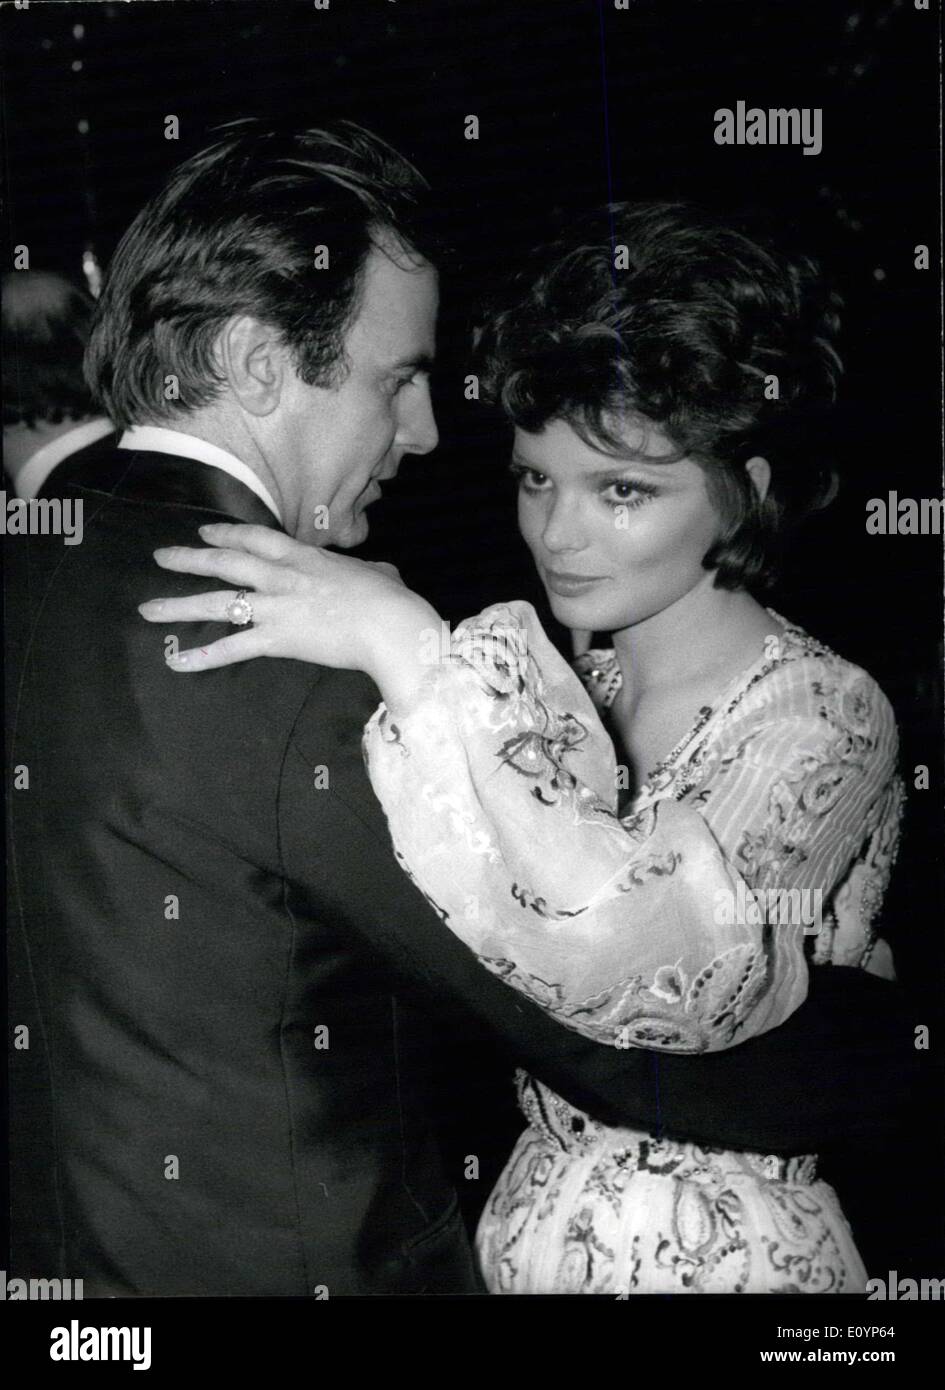 Jan. 18, 1971 - Film ball 1971 at Munich: Source of the Stars was the motto for the Society and film ball 1971 at Munich which took place last weekend. The high society of the international film world and prominence from politics, economics and culture enjoyed dancing till late in the morning. The famous orchestras of Max Greger and Hugo Strasser appearing together for the first time ever livened up the atmosphere and changed the dancing floor into an inferno. The exclusive audience stampen with enthusiasm and threw flowers when Marianne Mendt appeared singing her songs with hot temper Stock Photo